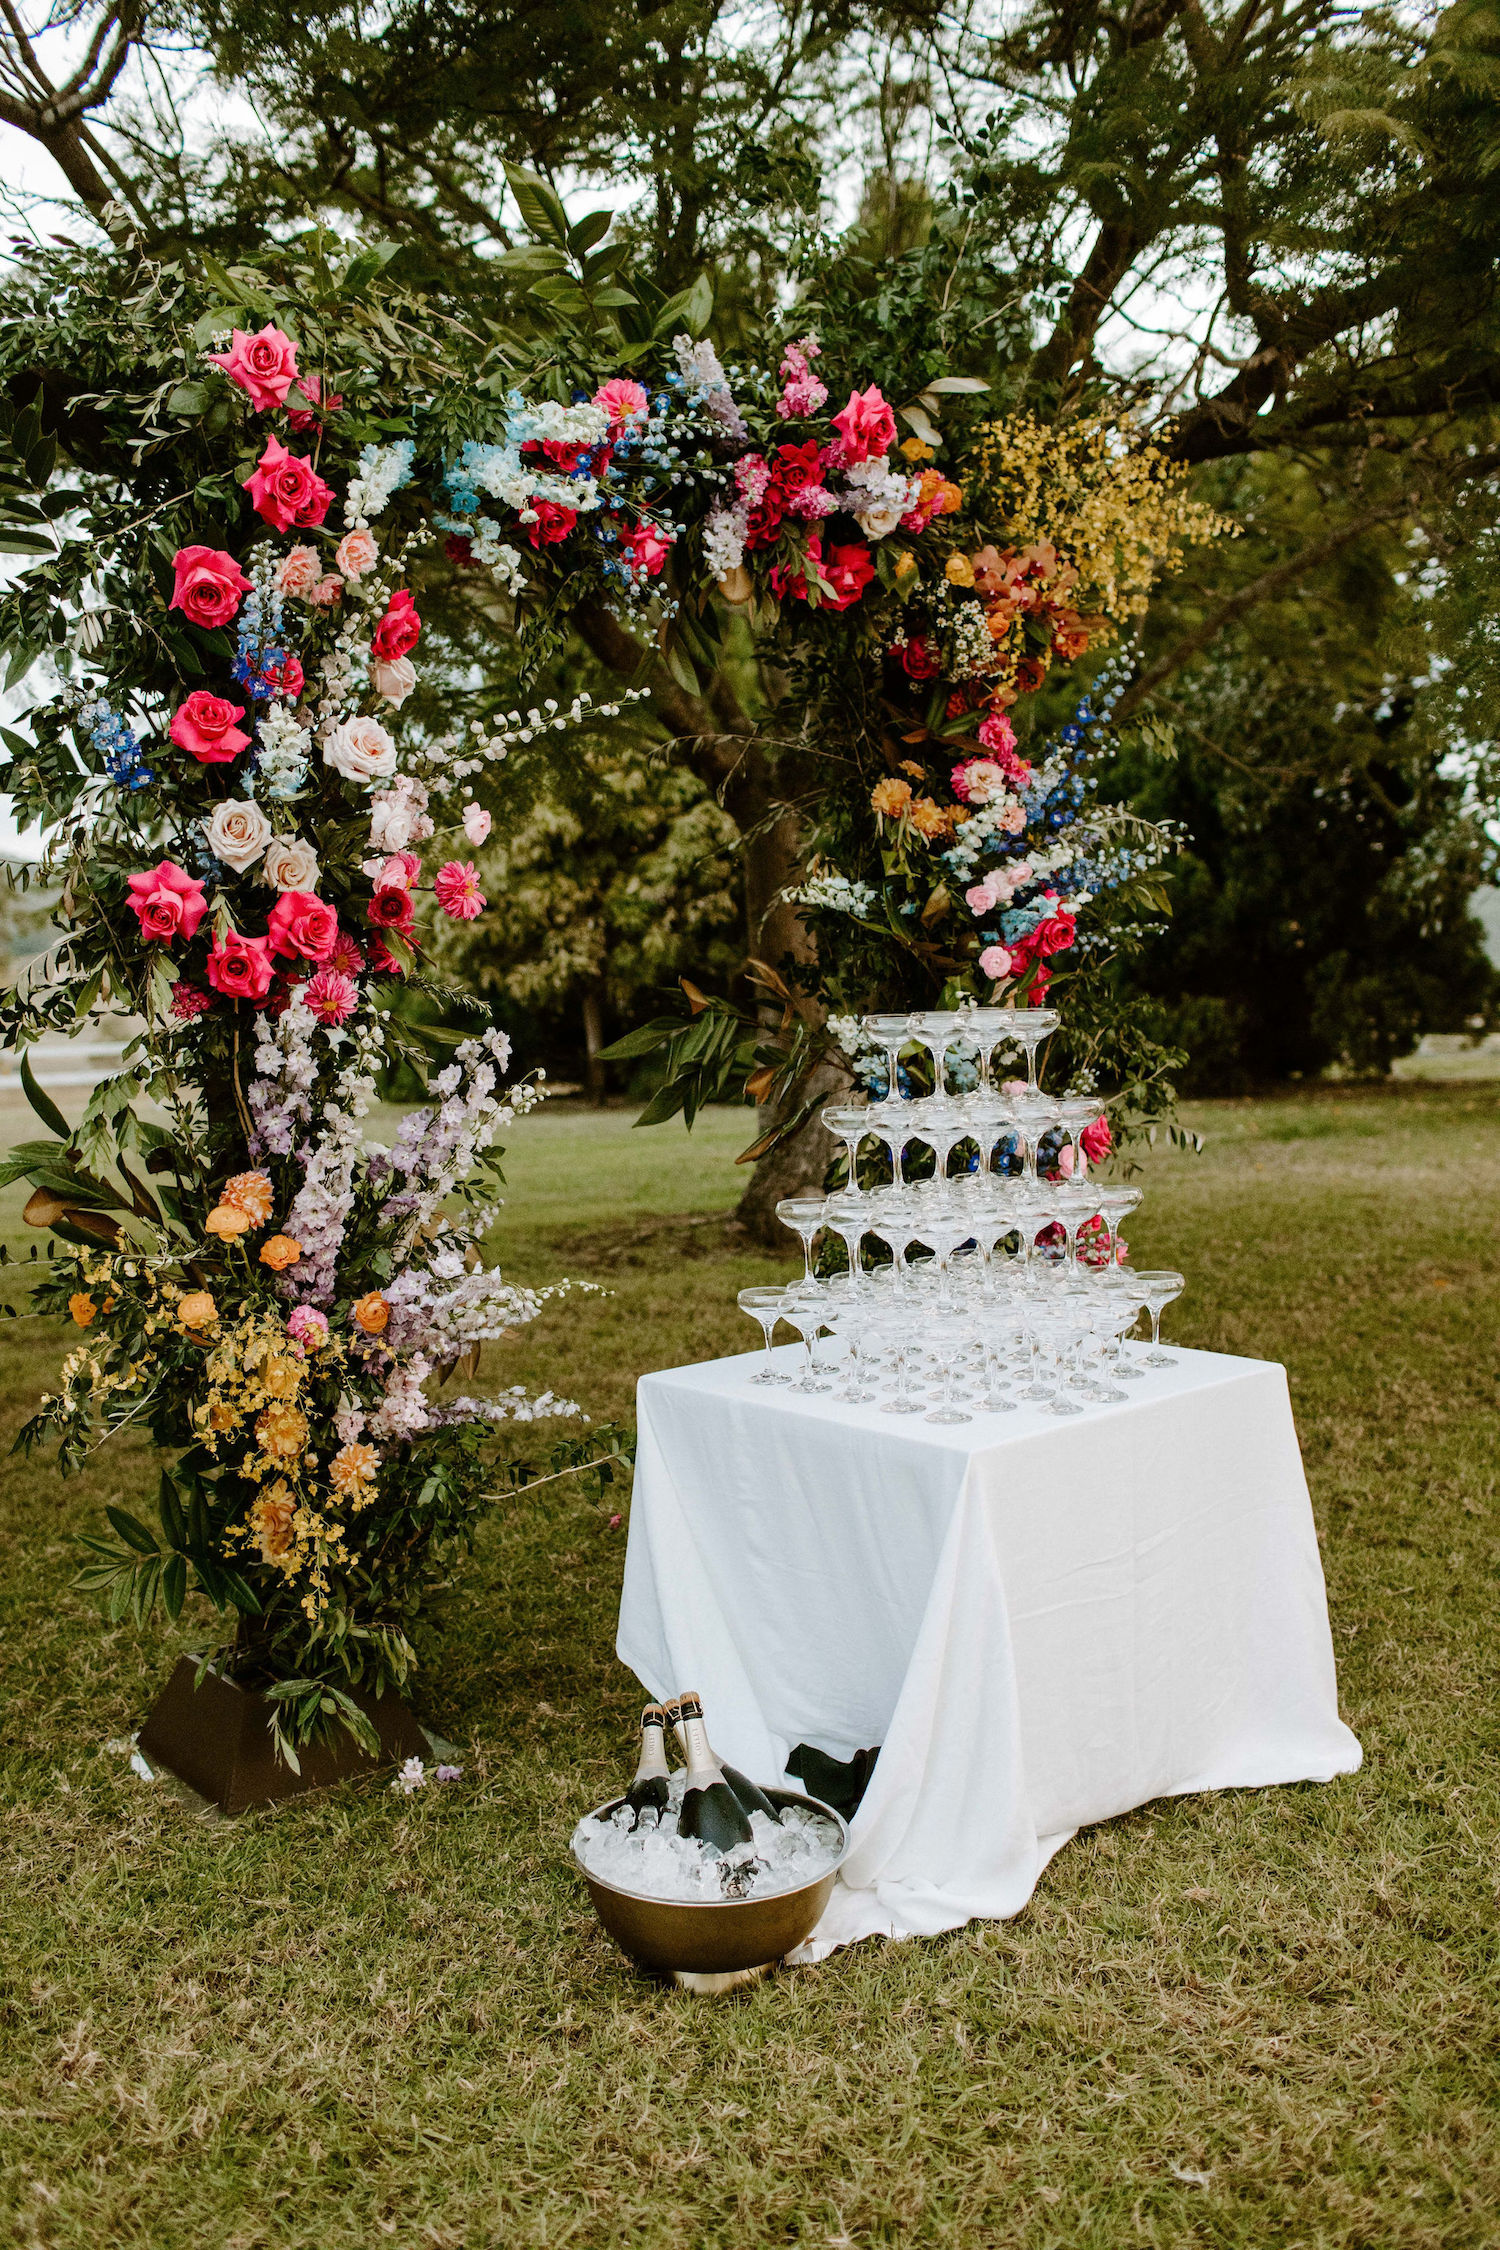 Vibrant floral arbour repurposed for this champagne tower garden party wedding